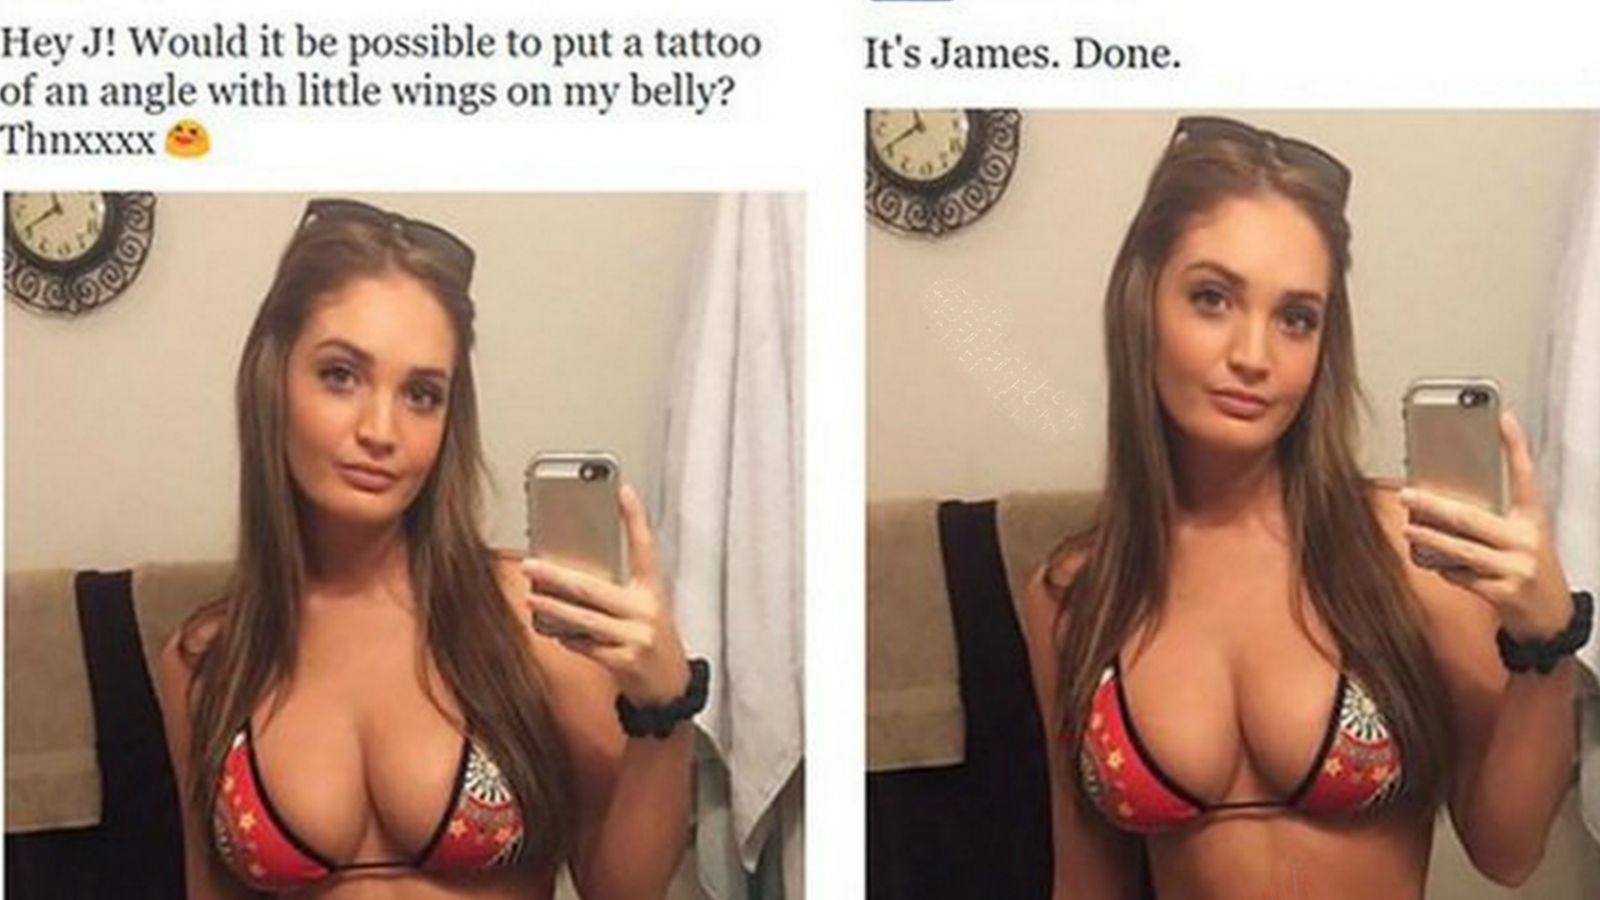 29 People Request to Get Photoshopped. One Artist Trolled Them in the Best Way Possible!